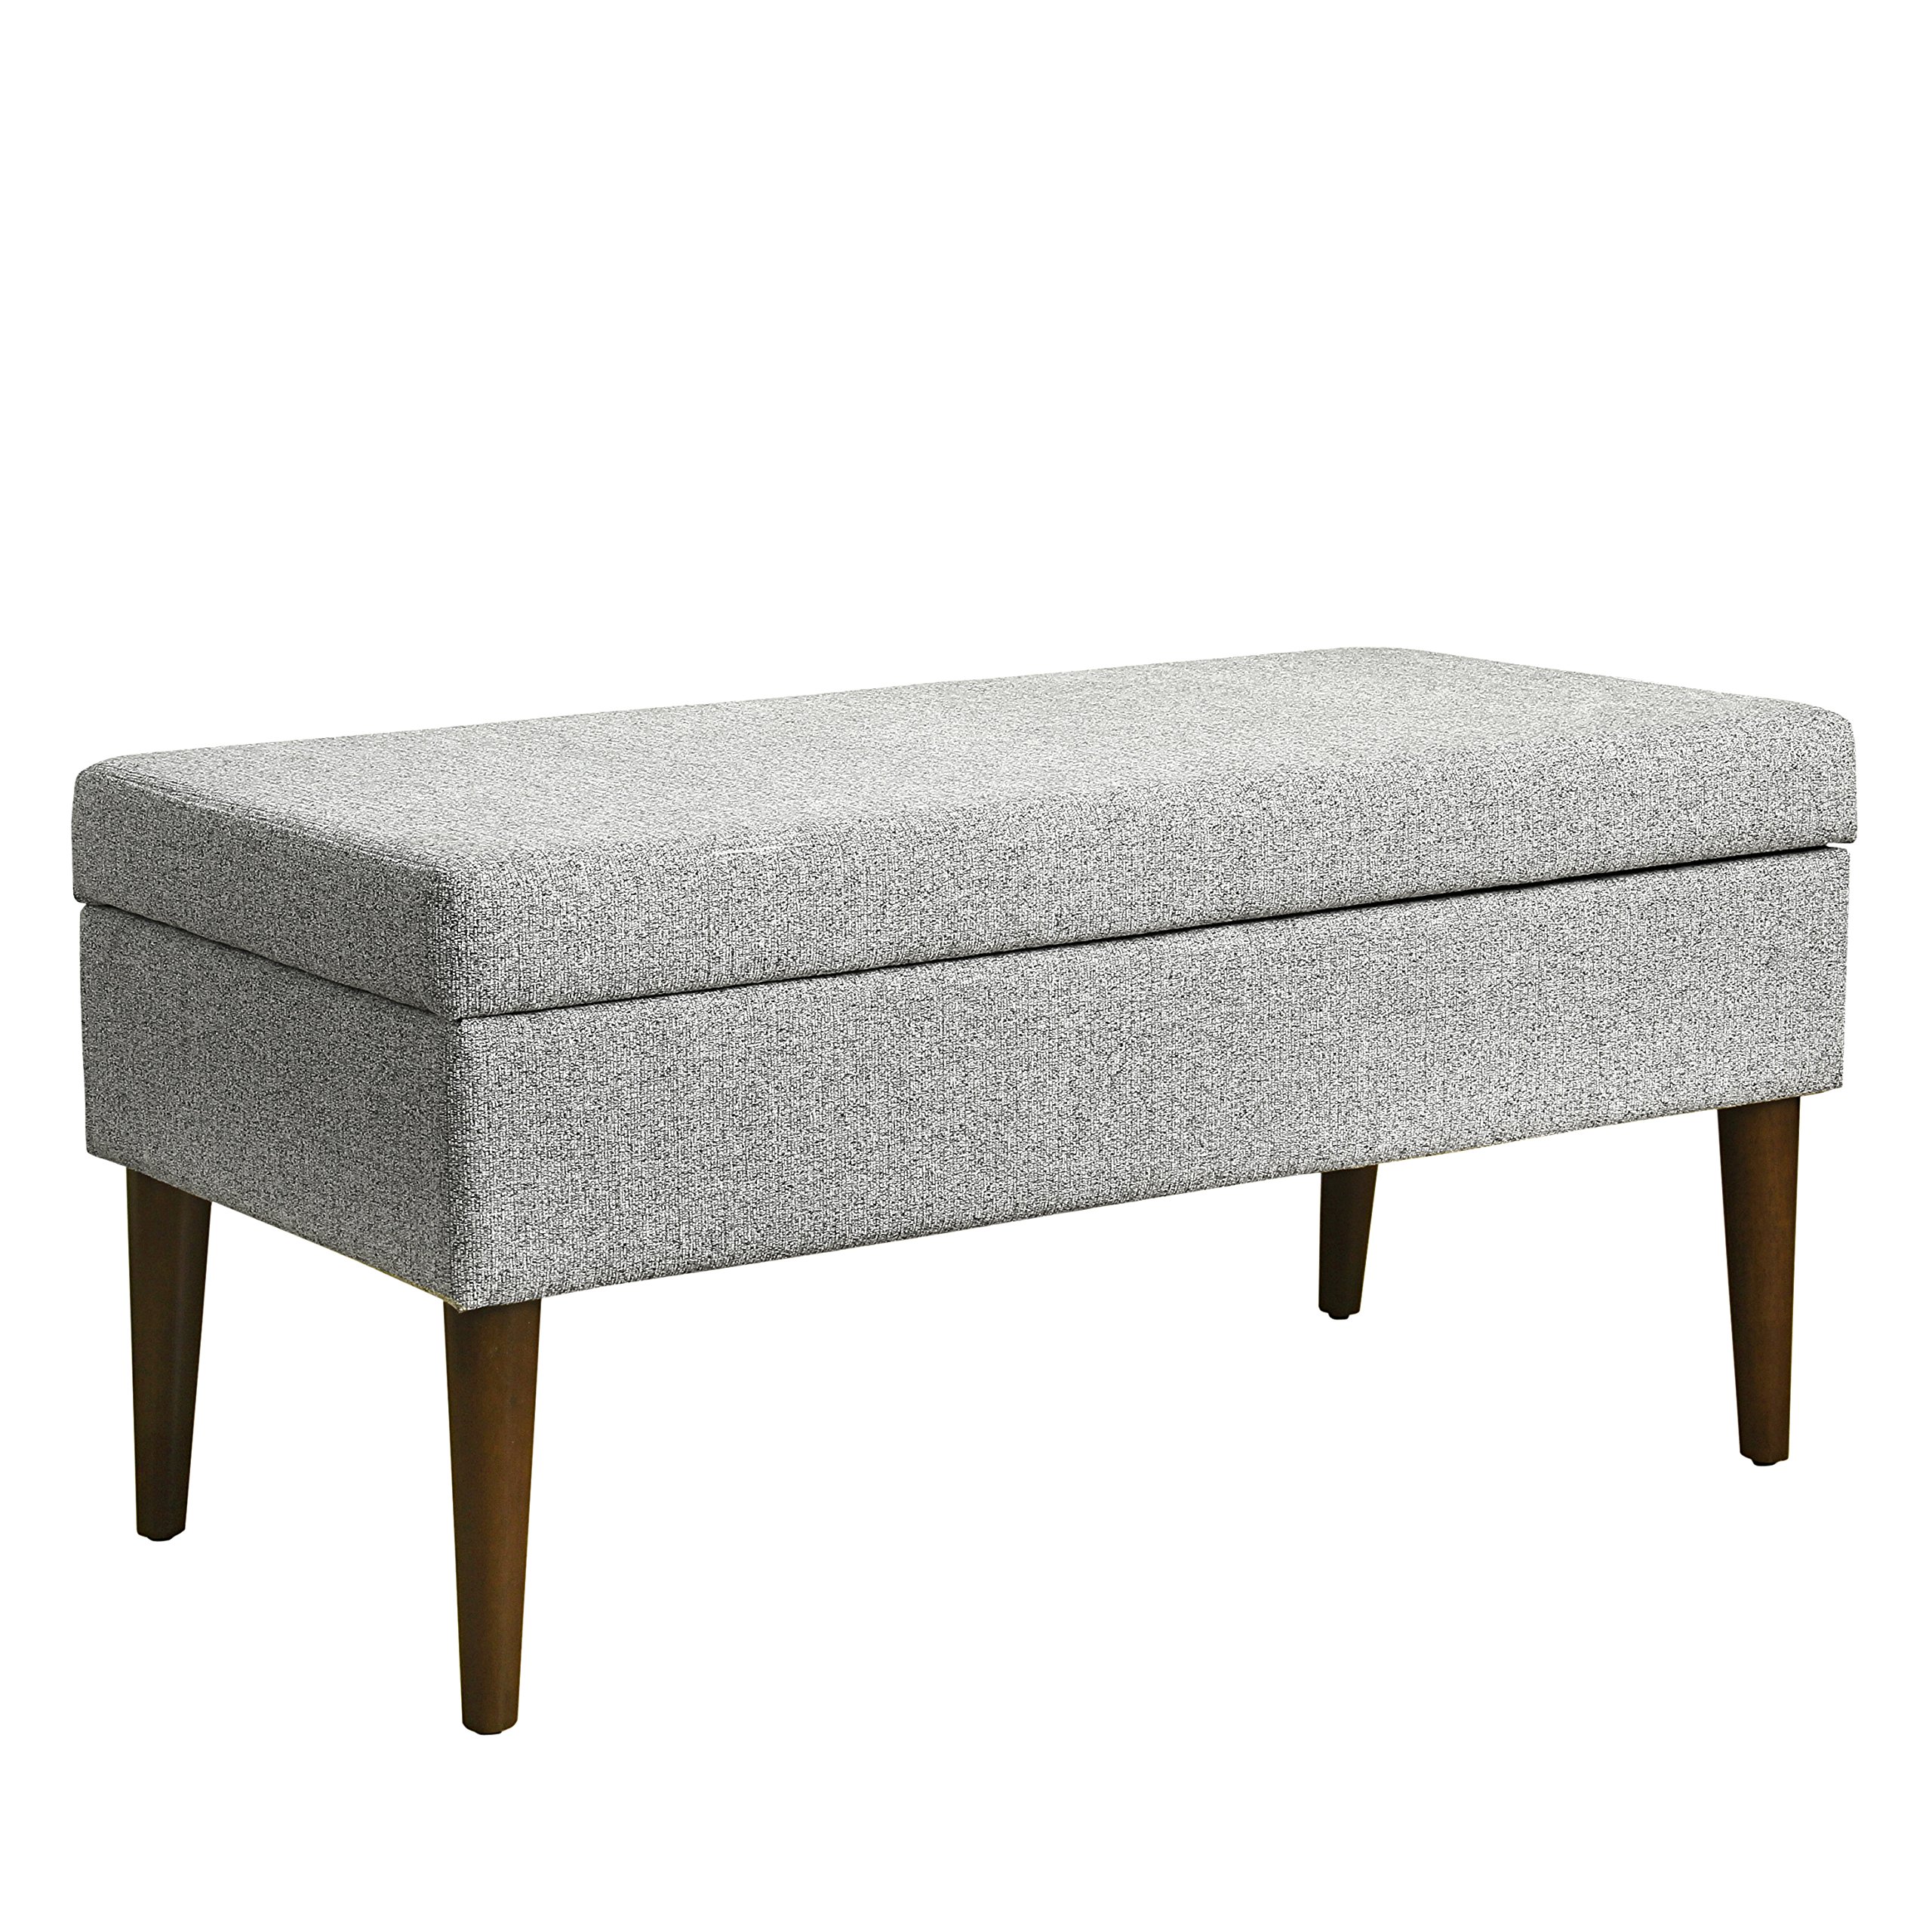 Spatial Order Home Decor | K8086-F2232 | Kaufmann Collection Modern Storage Ottoman Bench | Large Ottoman Bench with Storage for Living Room & Bedroom, Smoke Gray